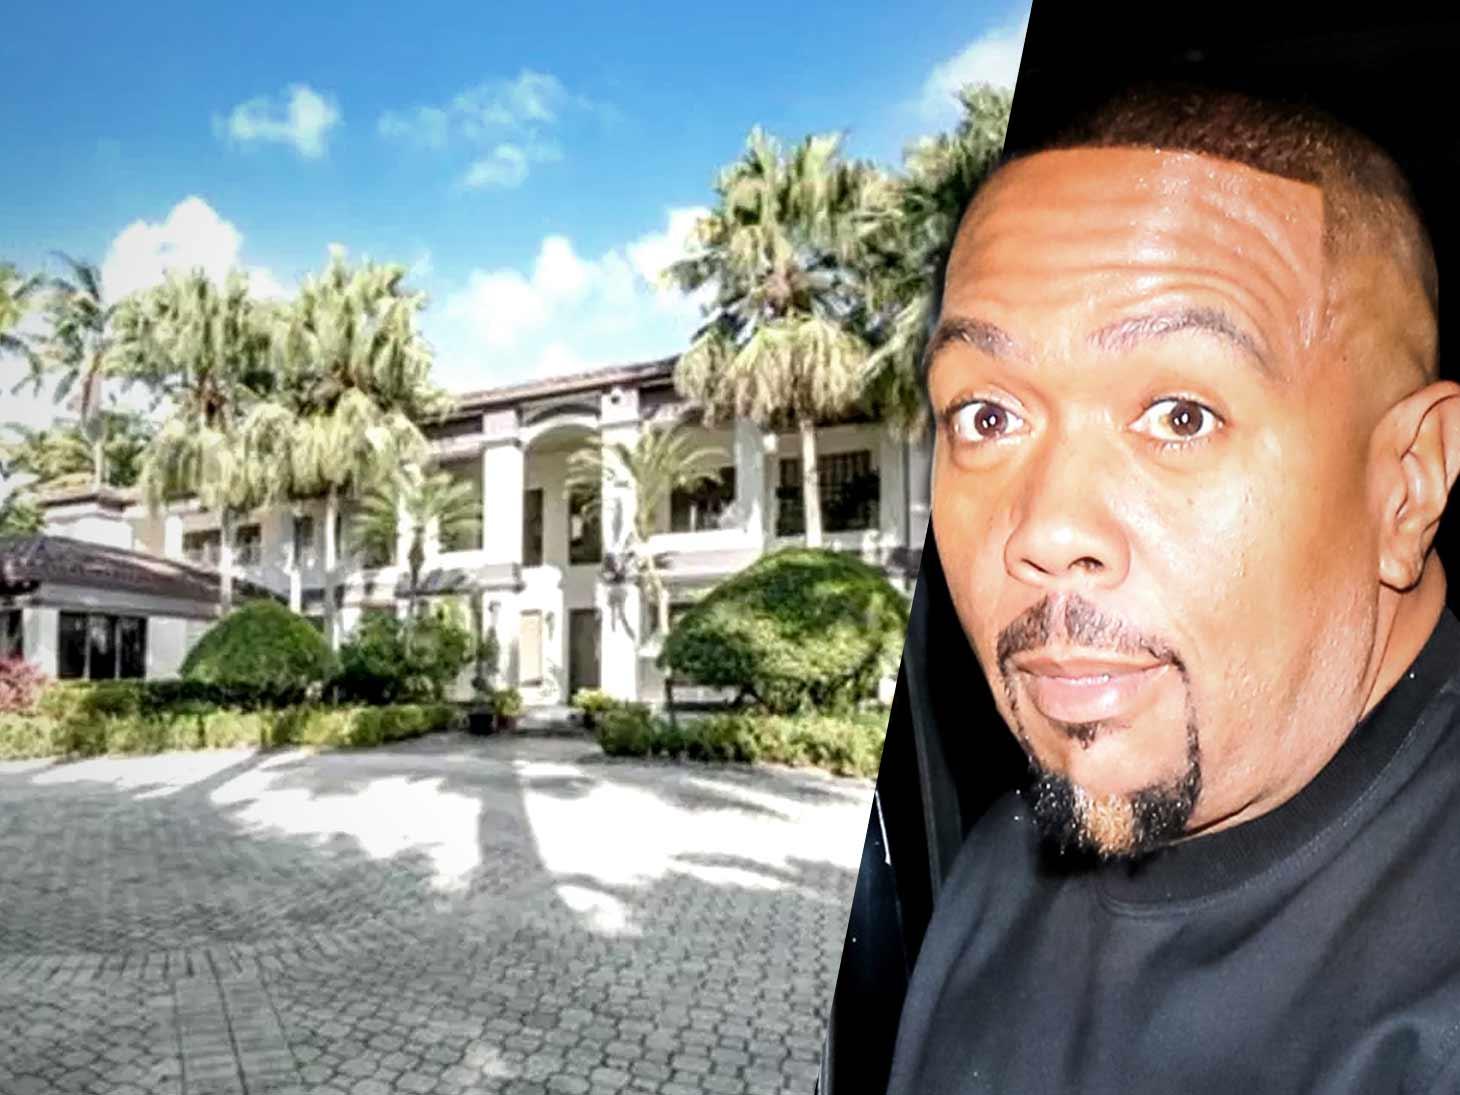 Timbaland Sells Florida Mansion for $1.8 Million Following a Year of Squatter from Hell